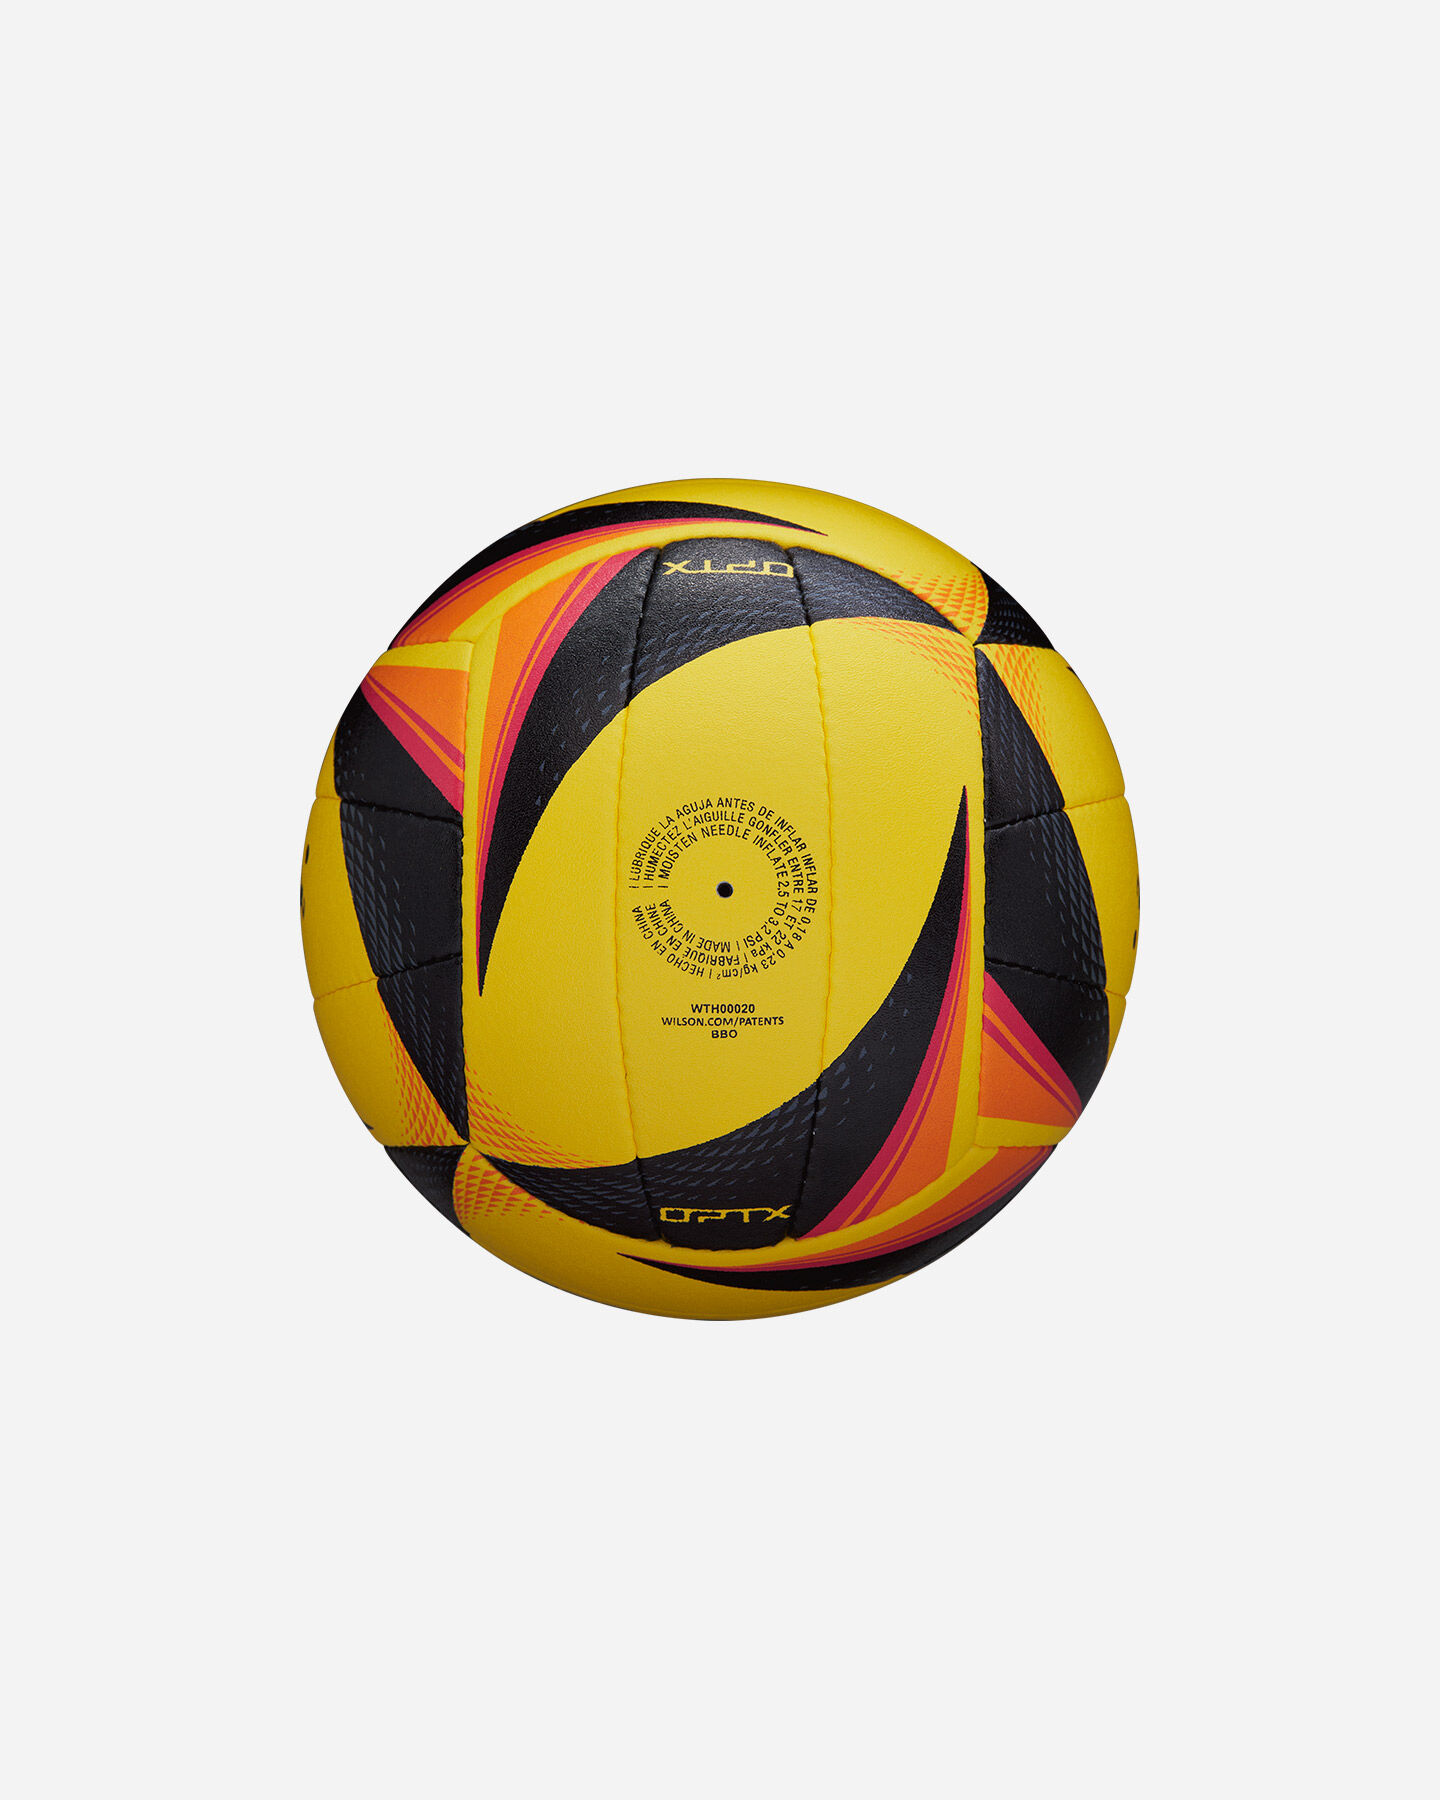  Pallone volley WILSON BEACH OPTX AVP OFFICIAL GB  S5440245|UNI|OFFICIAL scatto 5